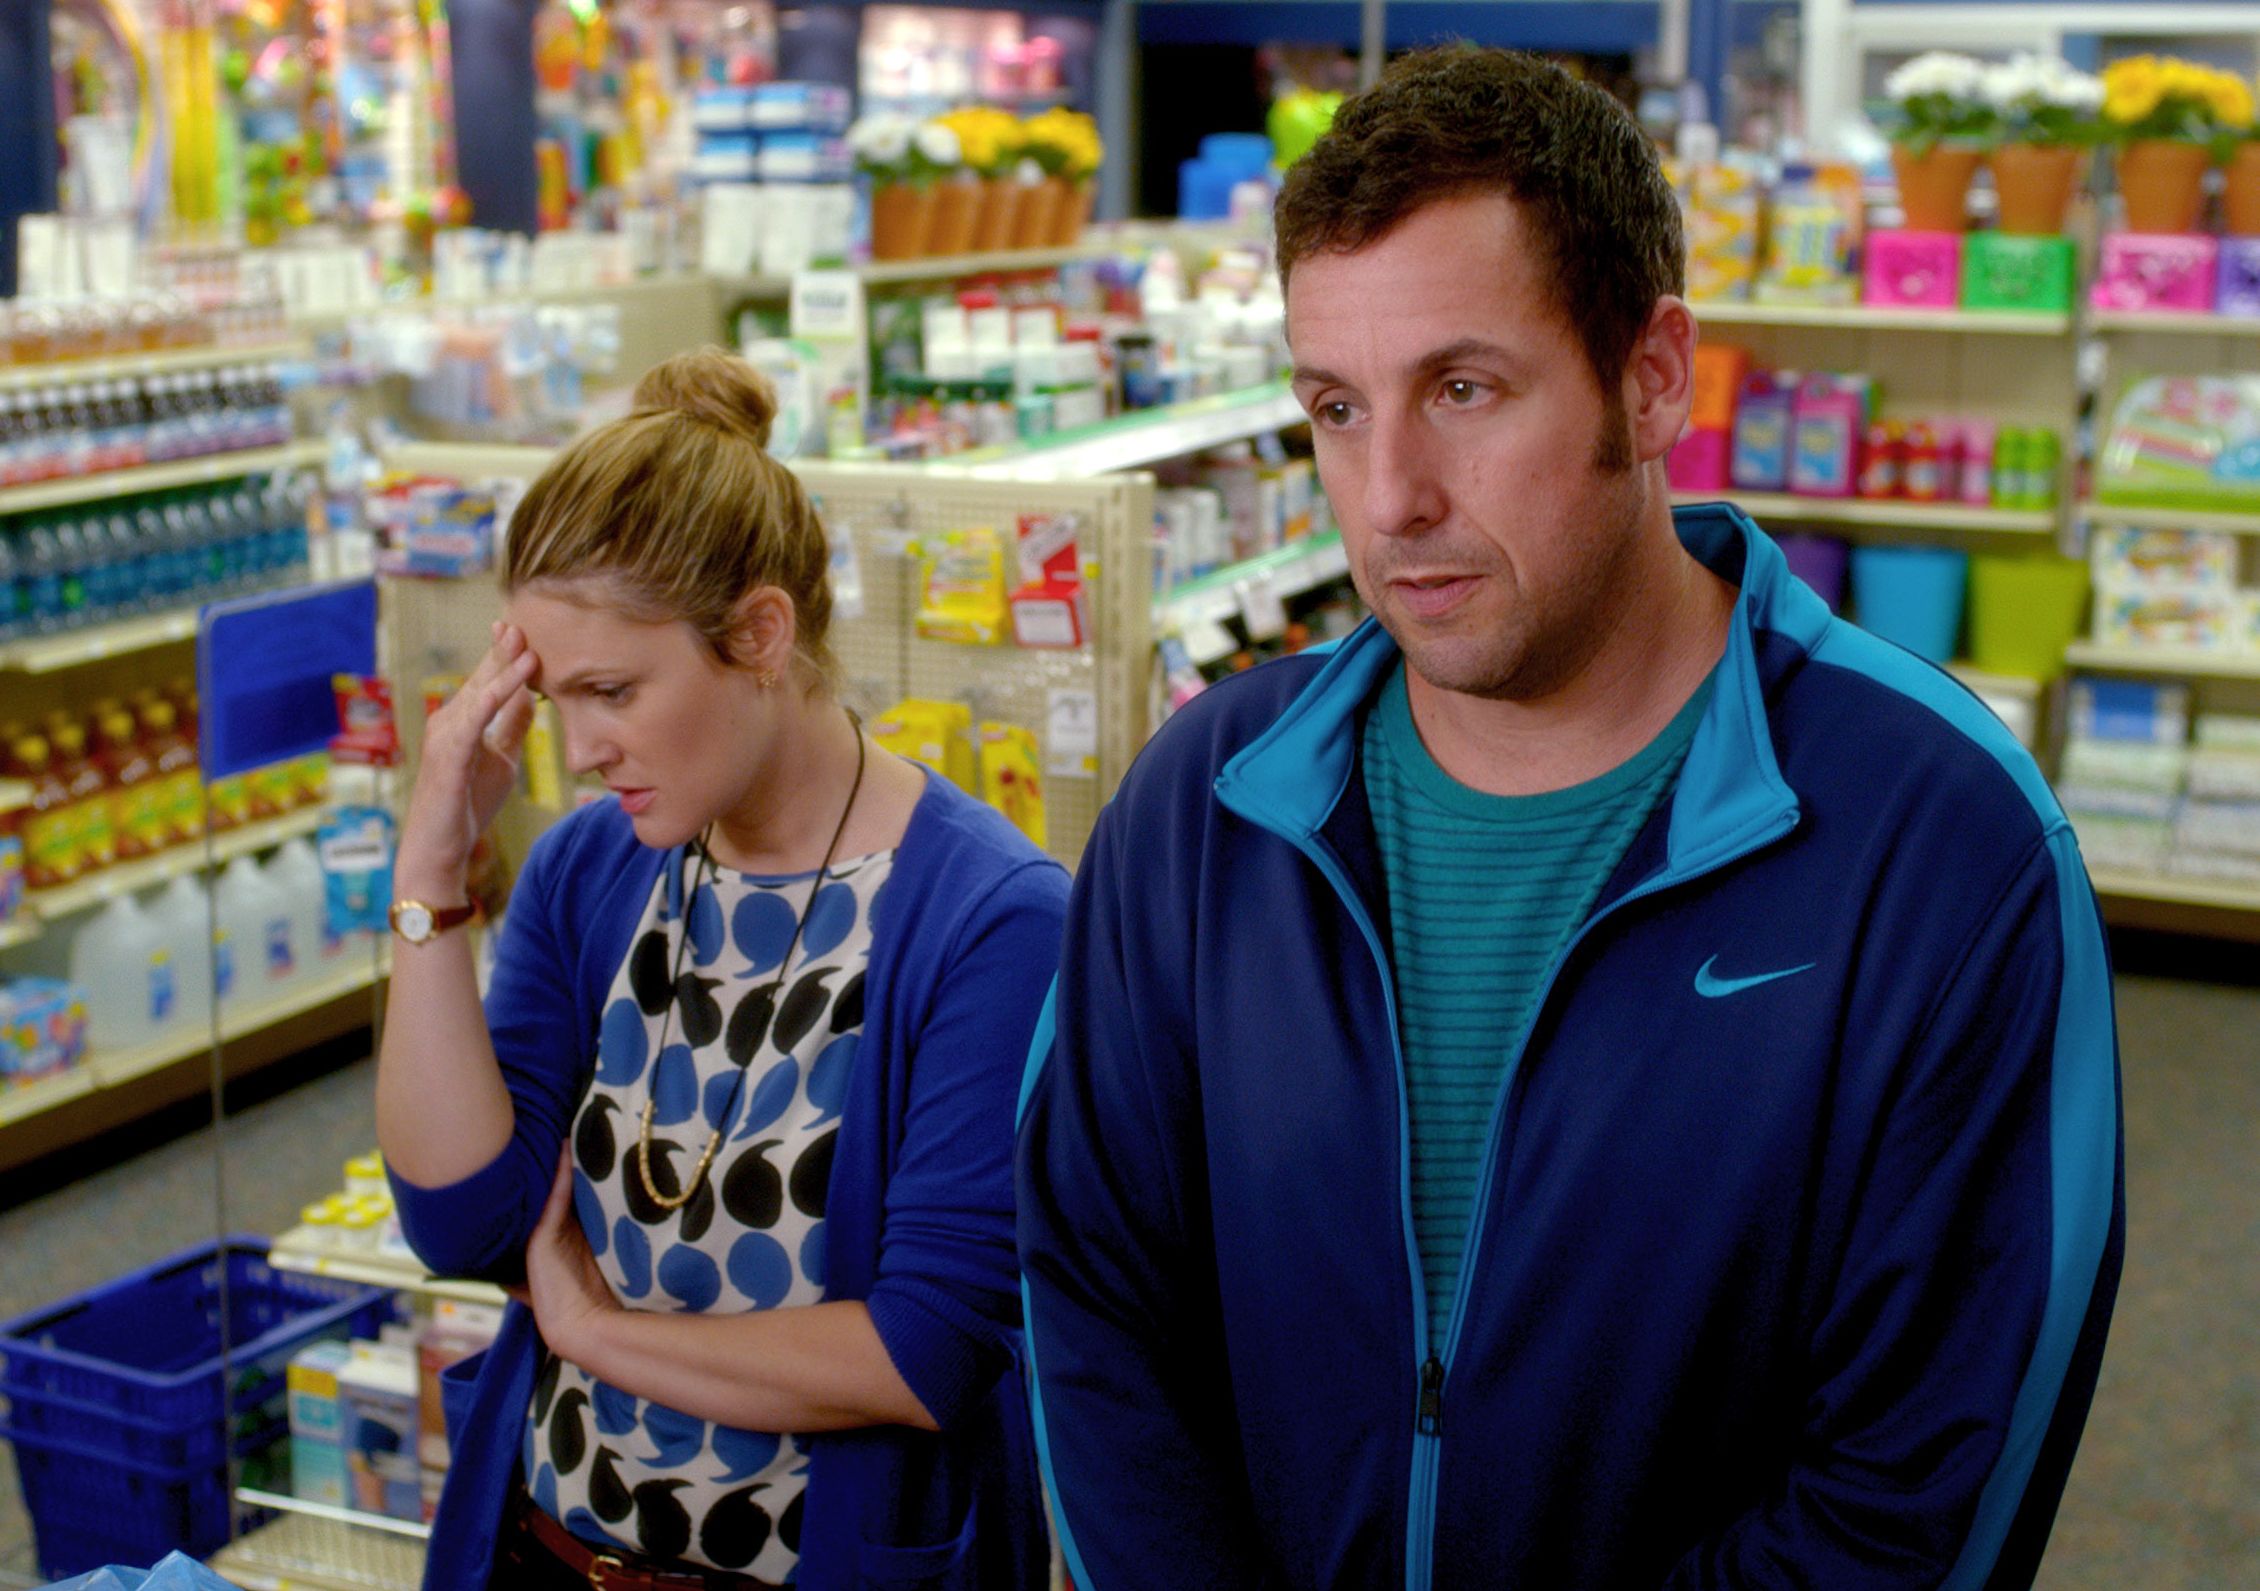 Adam Sandler and Drew Barrymore together again in the superm